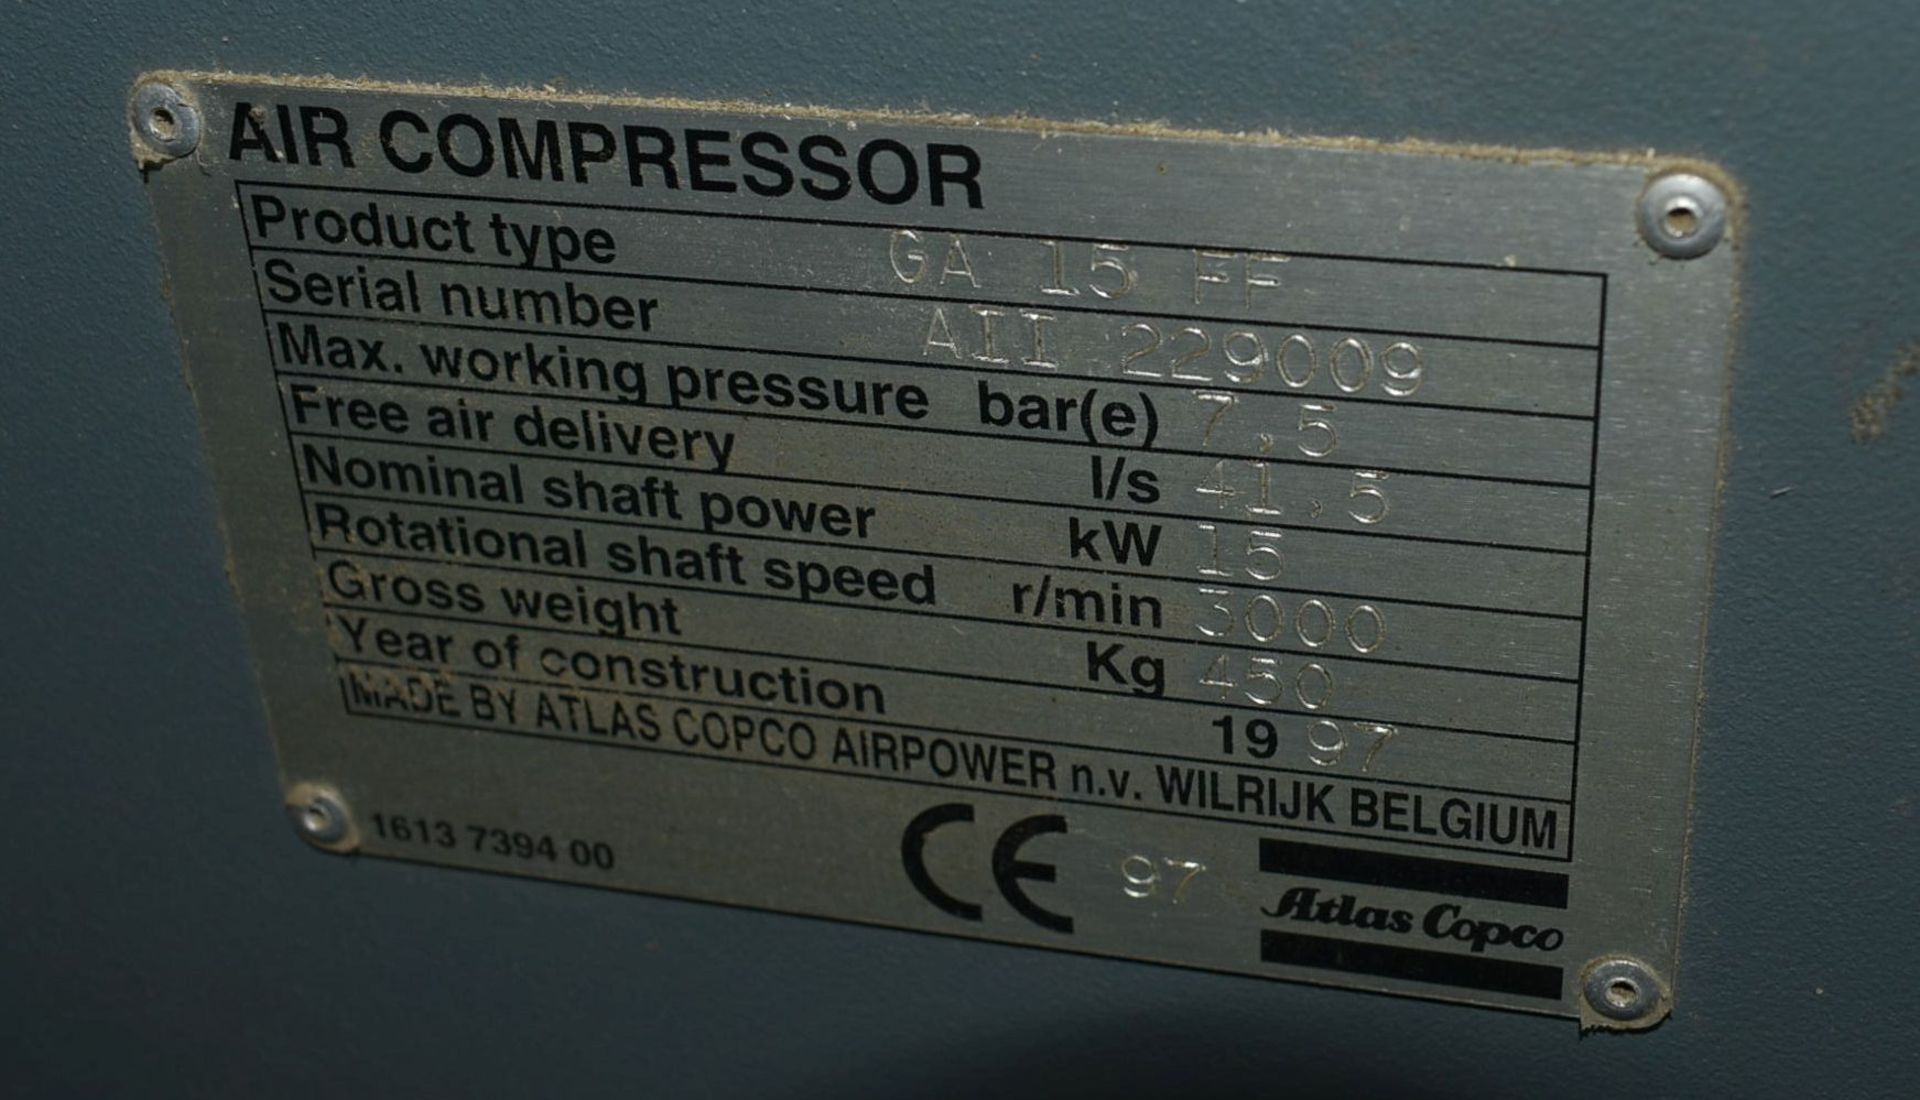 Atlas Copco GA15FF PACKAGE AIR COMPRESSOR, serial no. A11 229000, 450kg, year of manufacture 1997, - Image 3 of 3